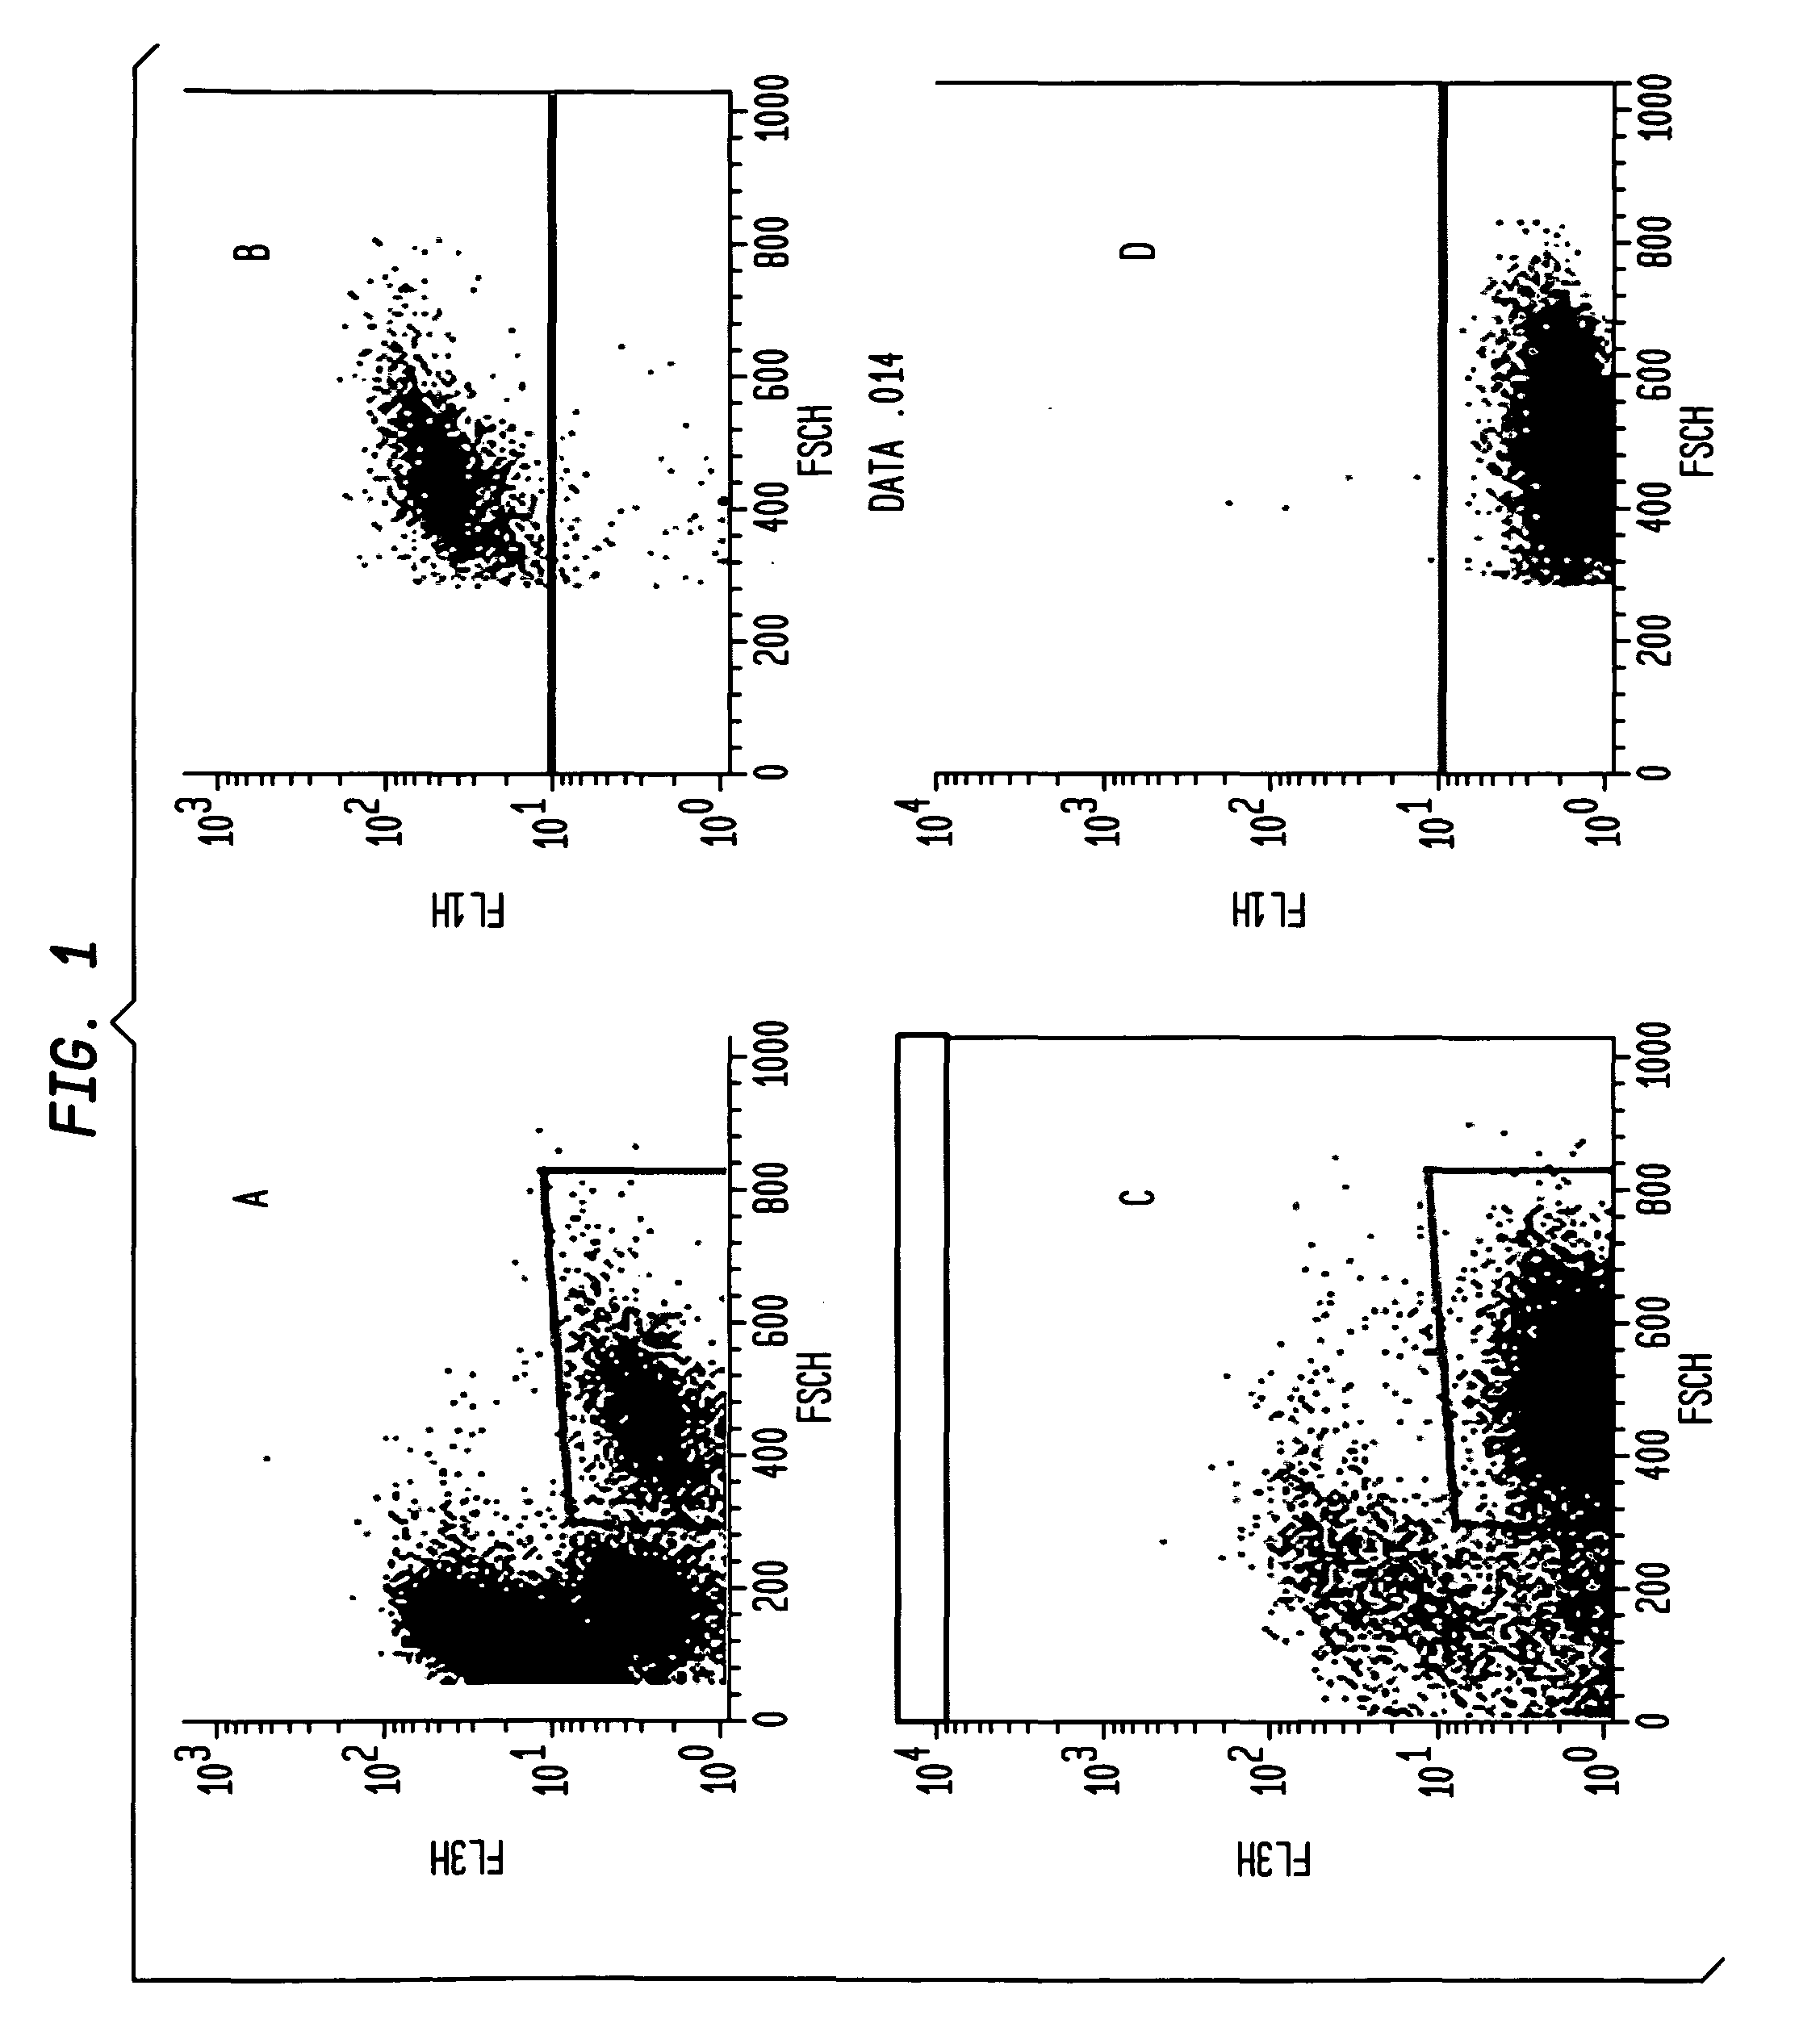 Assay for identifying antigens that activate b cell receptors comprising neutralizing antibodies